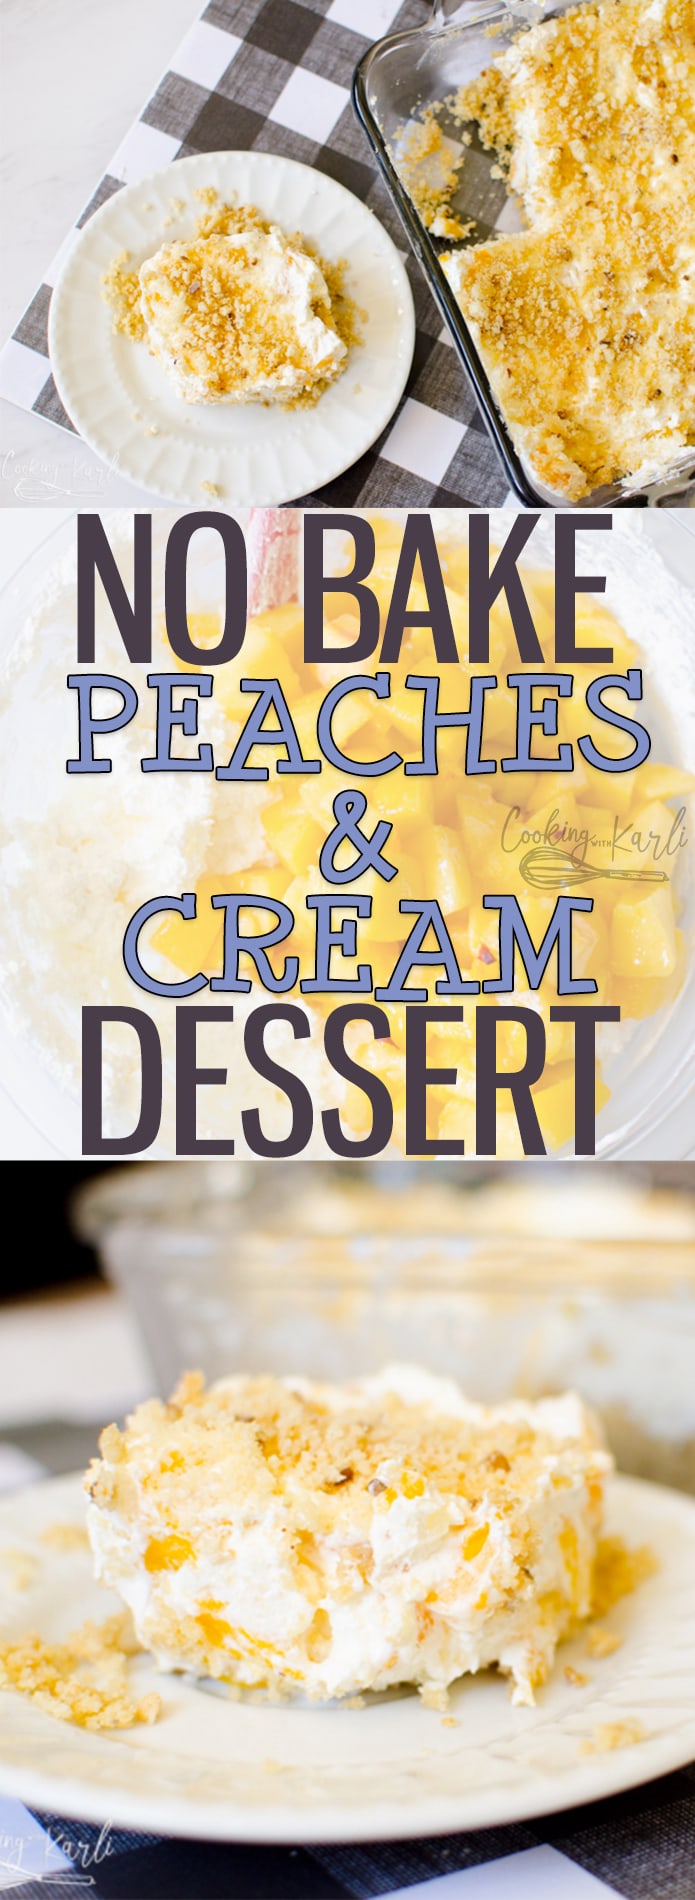 No Bake Peaches 'n Cream Dessert is packed full of fresh peaches, a peach infused creamy filling with a sweet Pecan Cookie Crust. This dessert is perfect for a summer night, weekend party or potluck! |Cooking with Karli| #nobake #dessert #peachesandcream #peach #cream #recipe #summerdessert #bbq #party